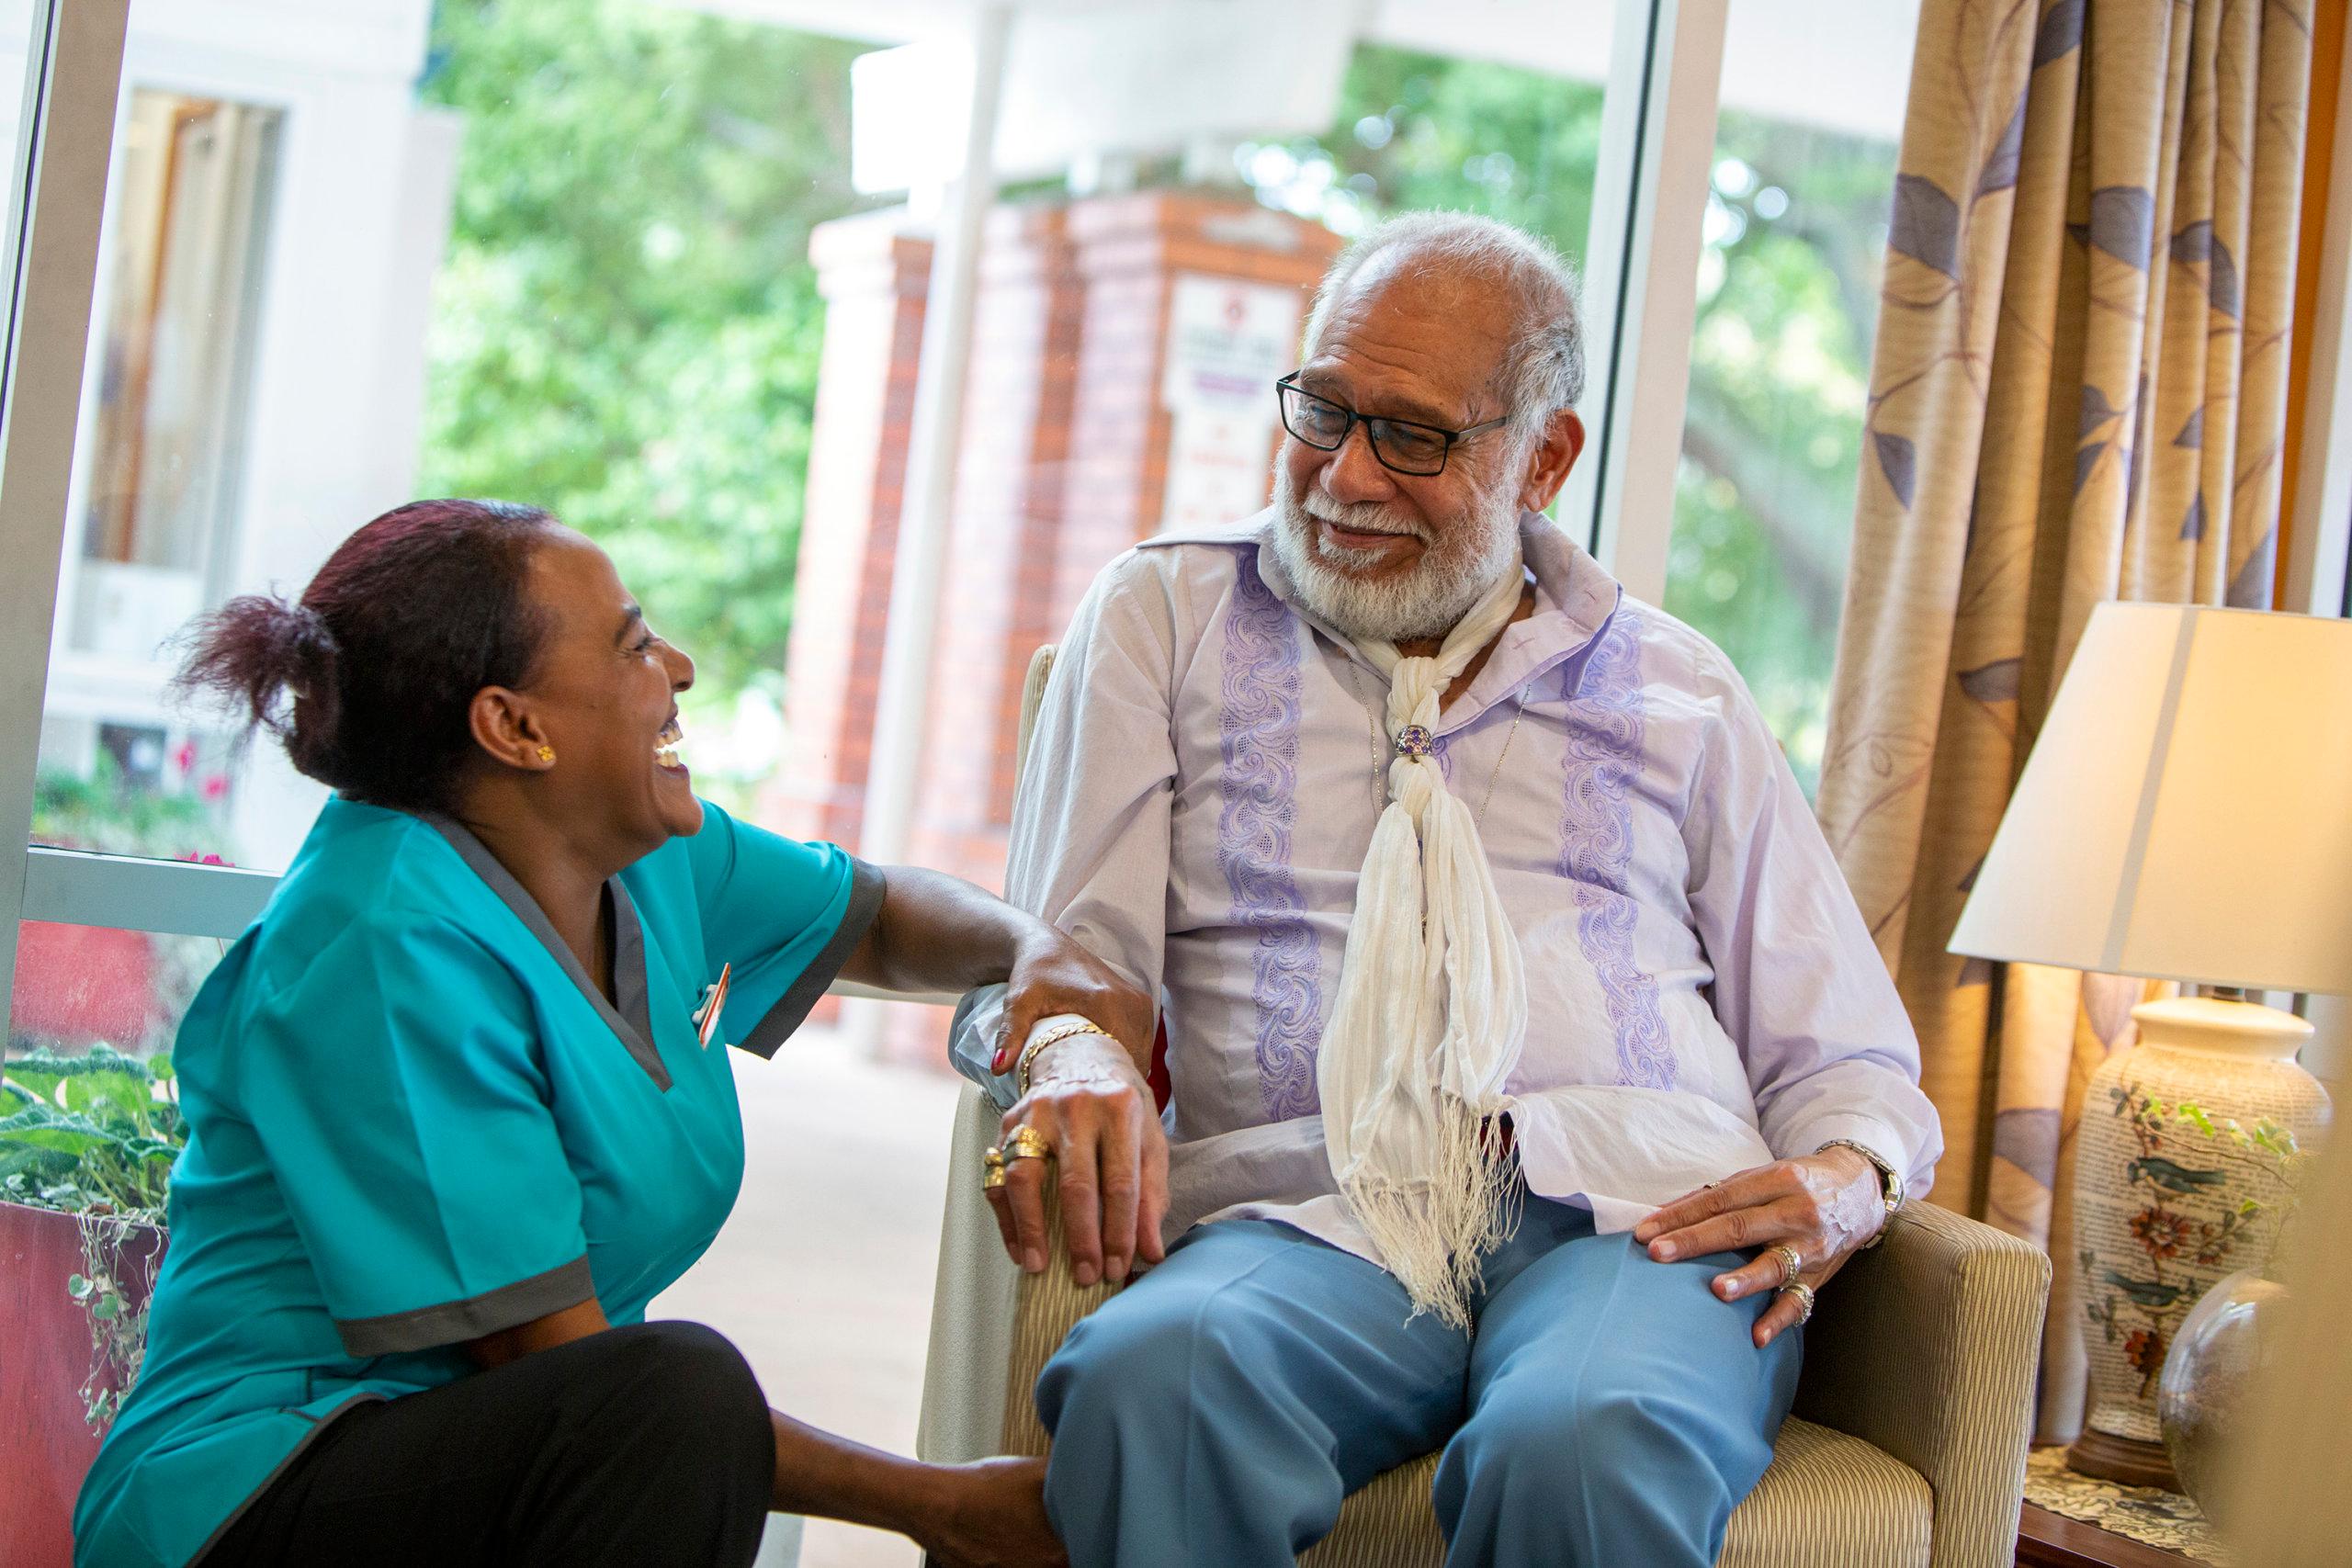 Oceania nurse laughing with a care resident